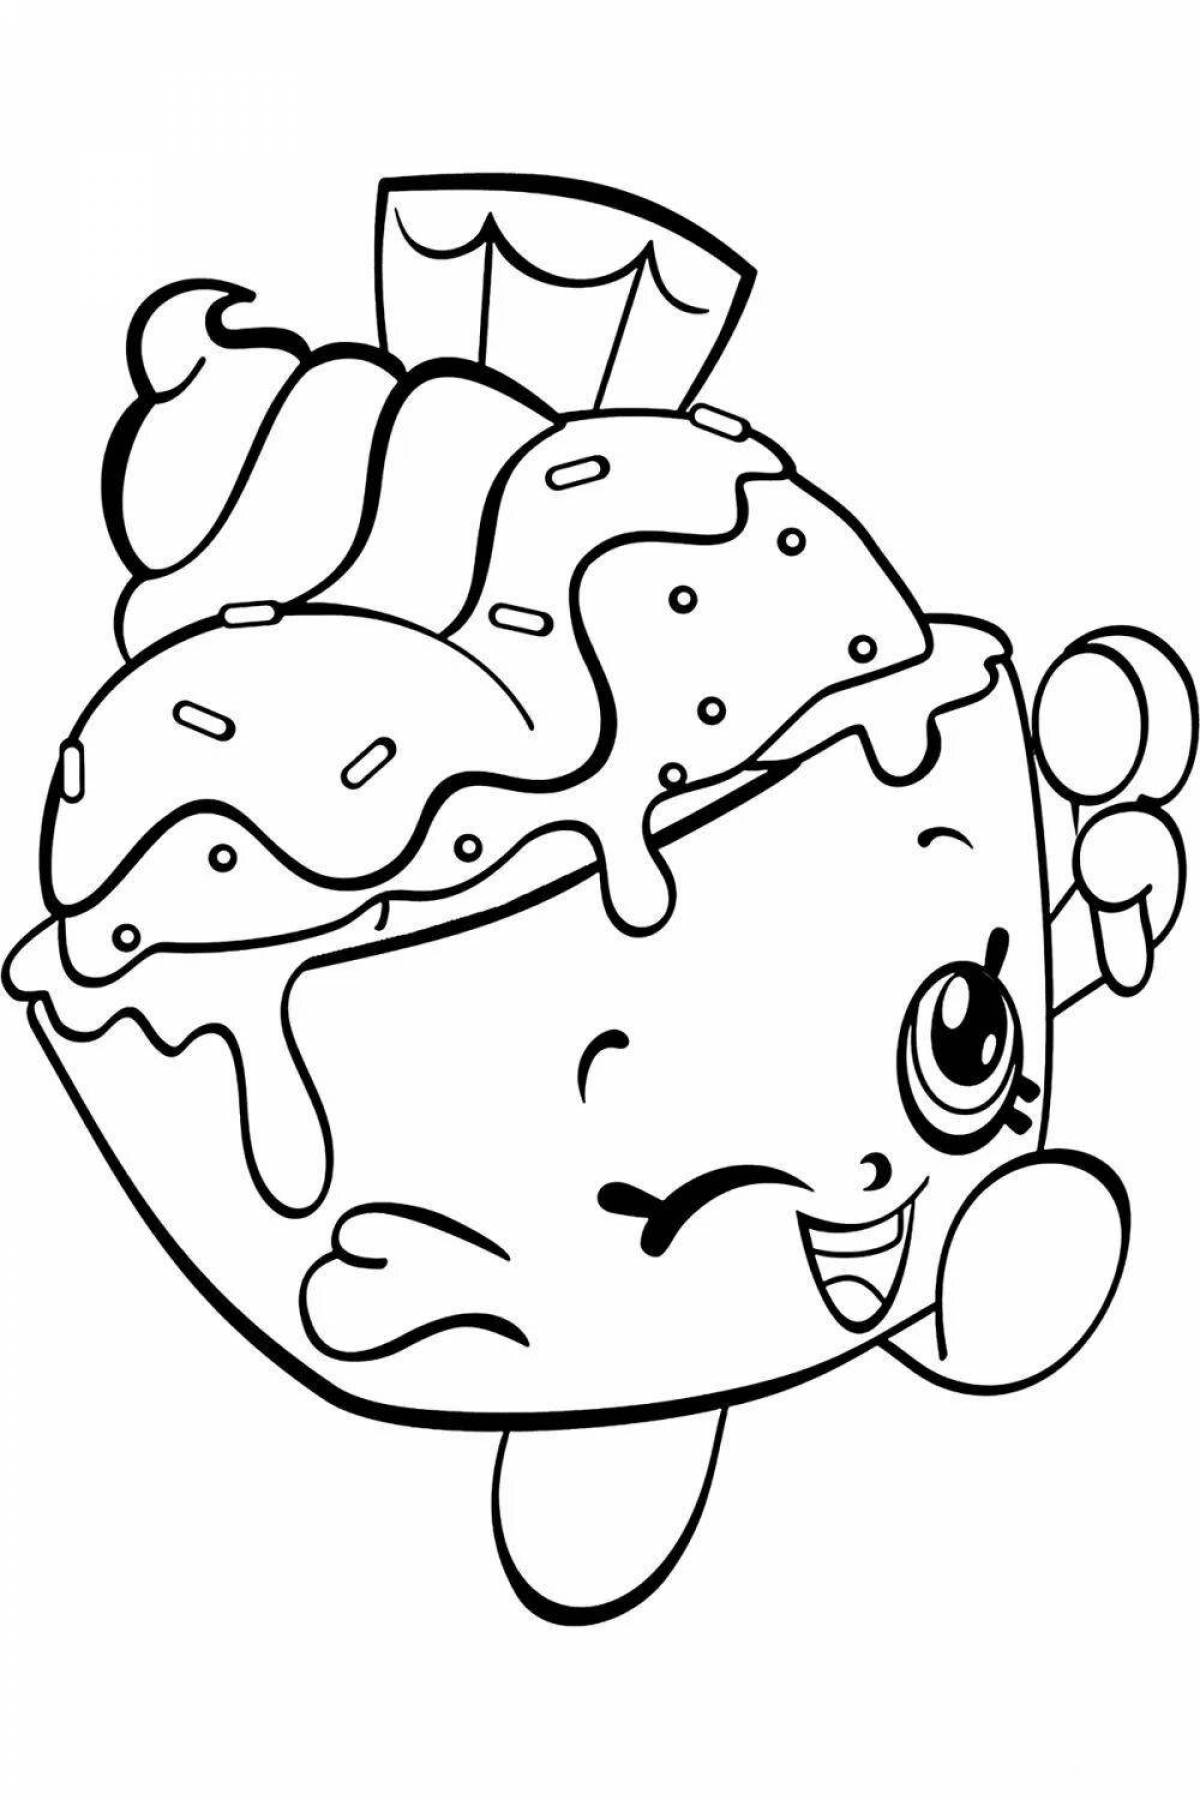 Shopkins sparkling apple coloring page